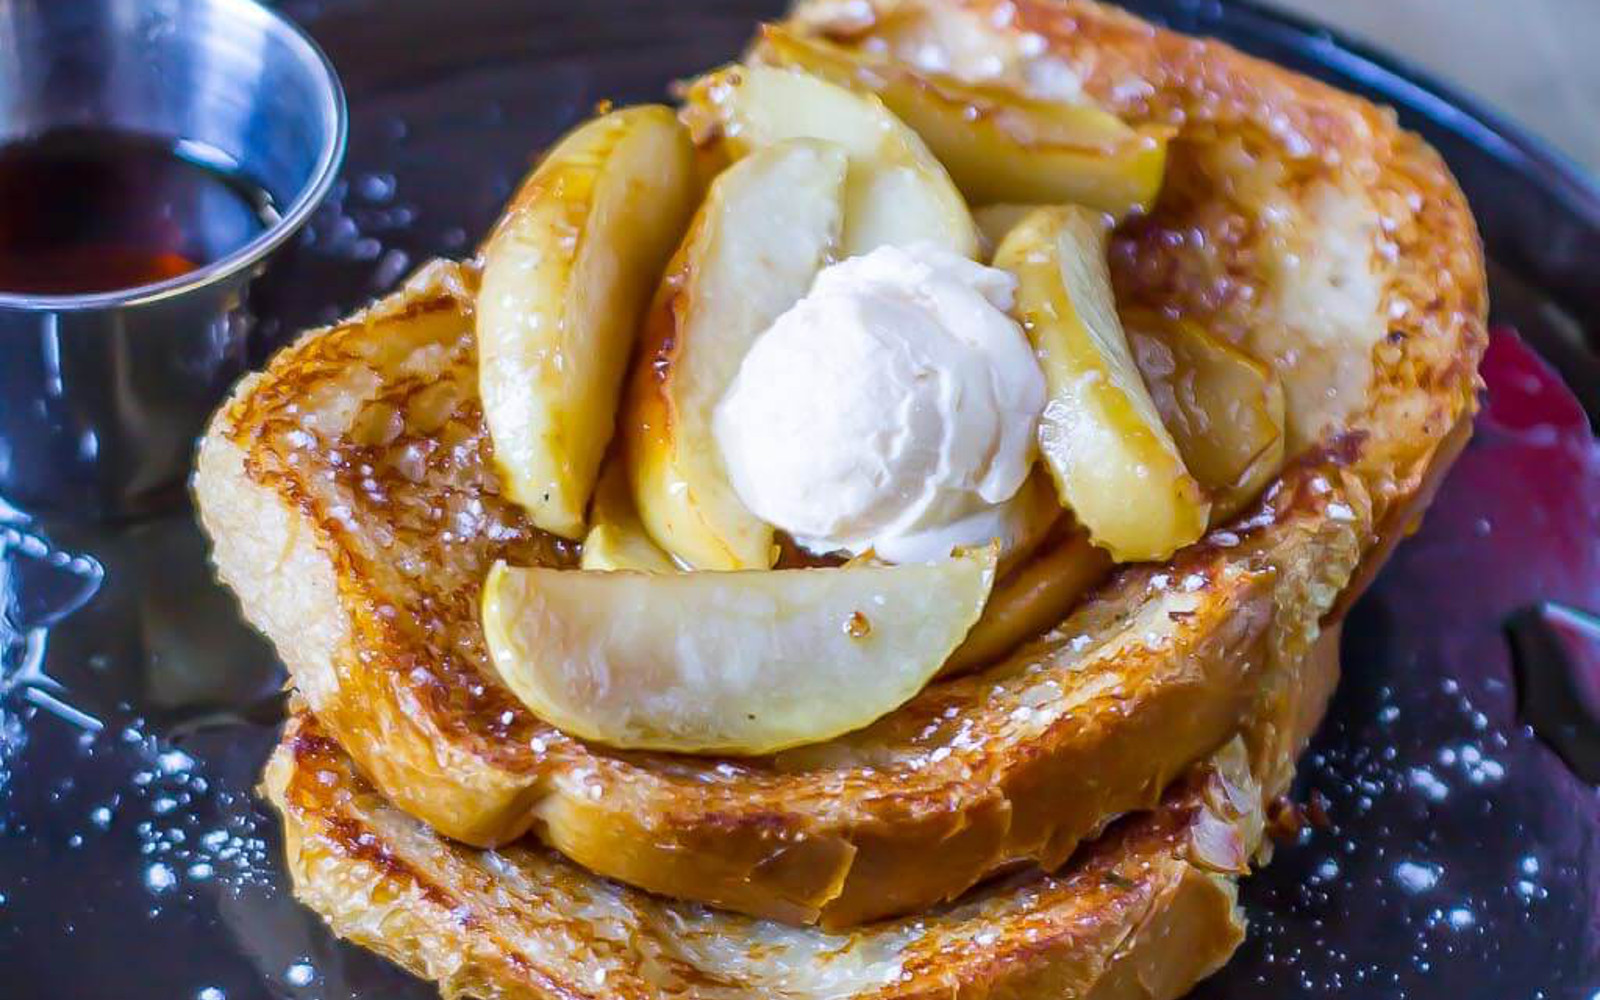 Vegan Cinnamon Apple French Toast with whipped cream and fresh fruit